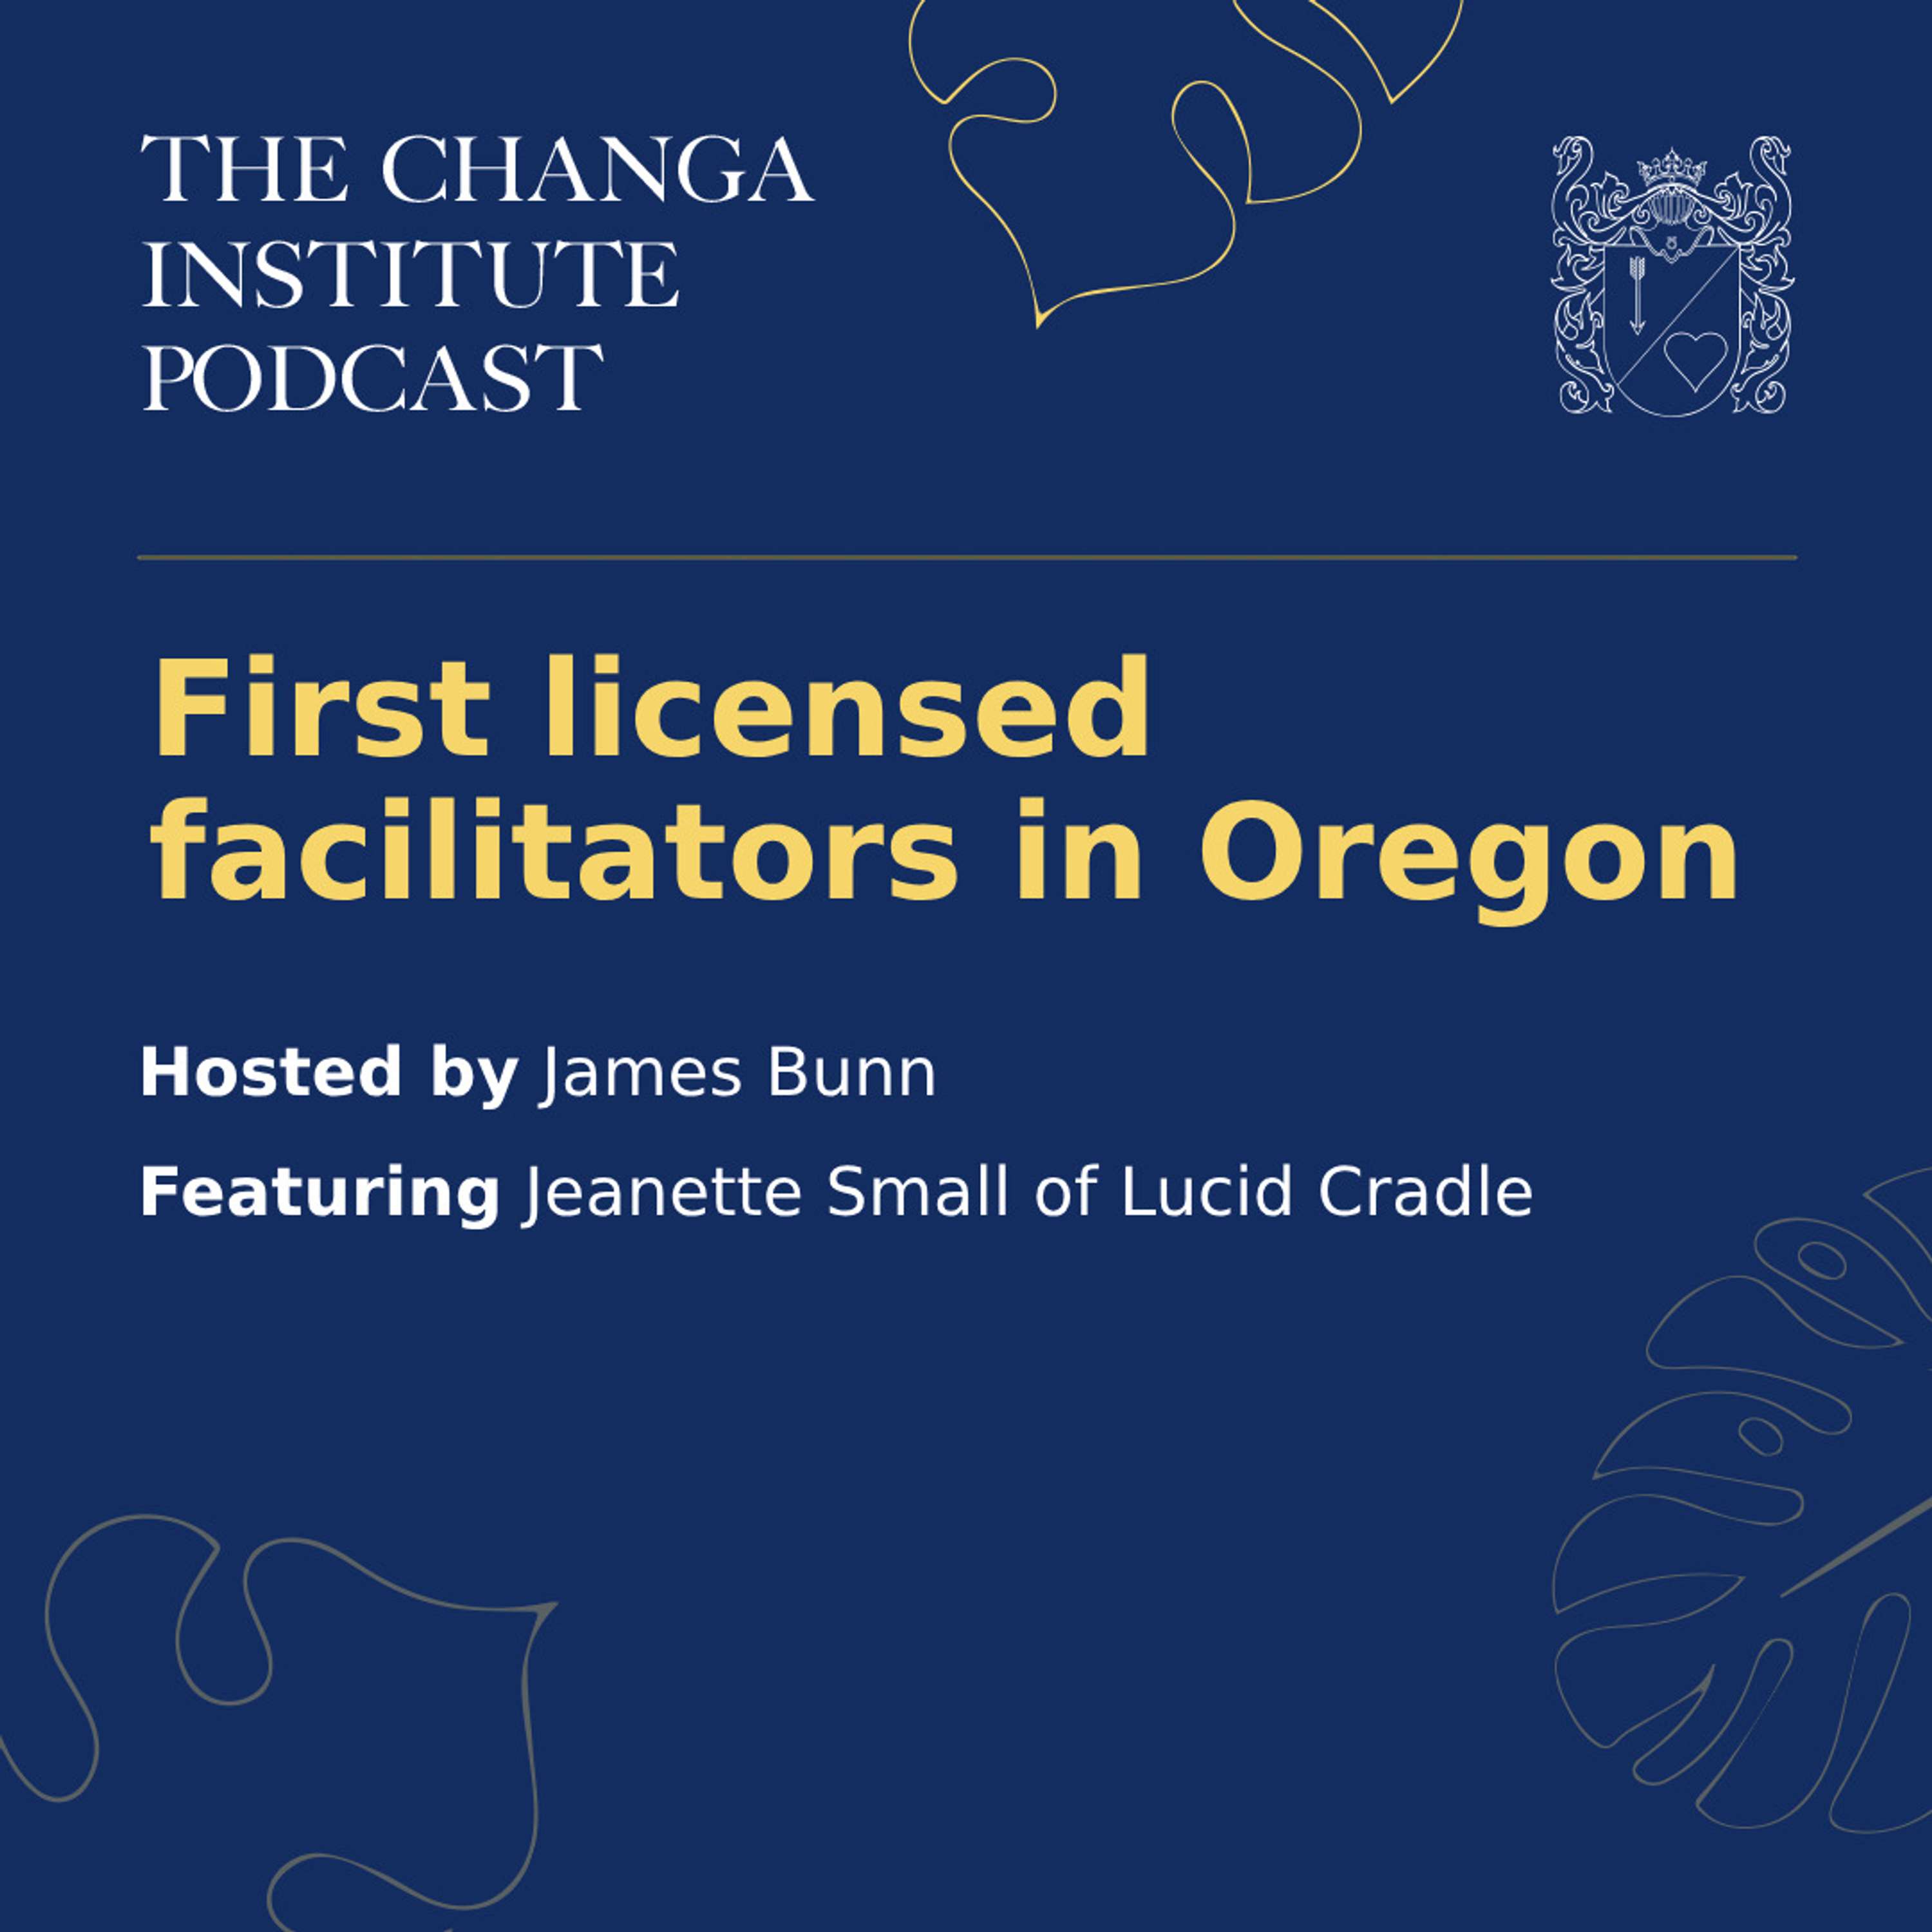 #1 - First licensed facilitators in Oregon with Jeanette Small